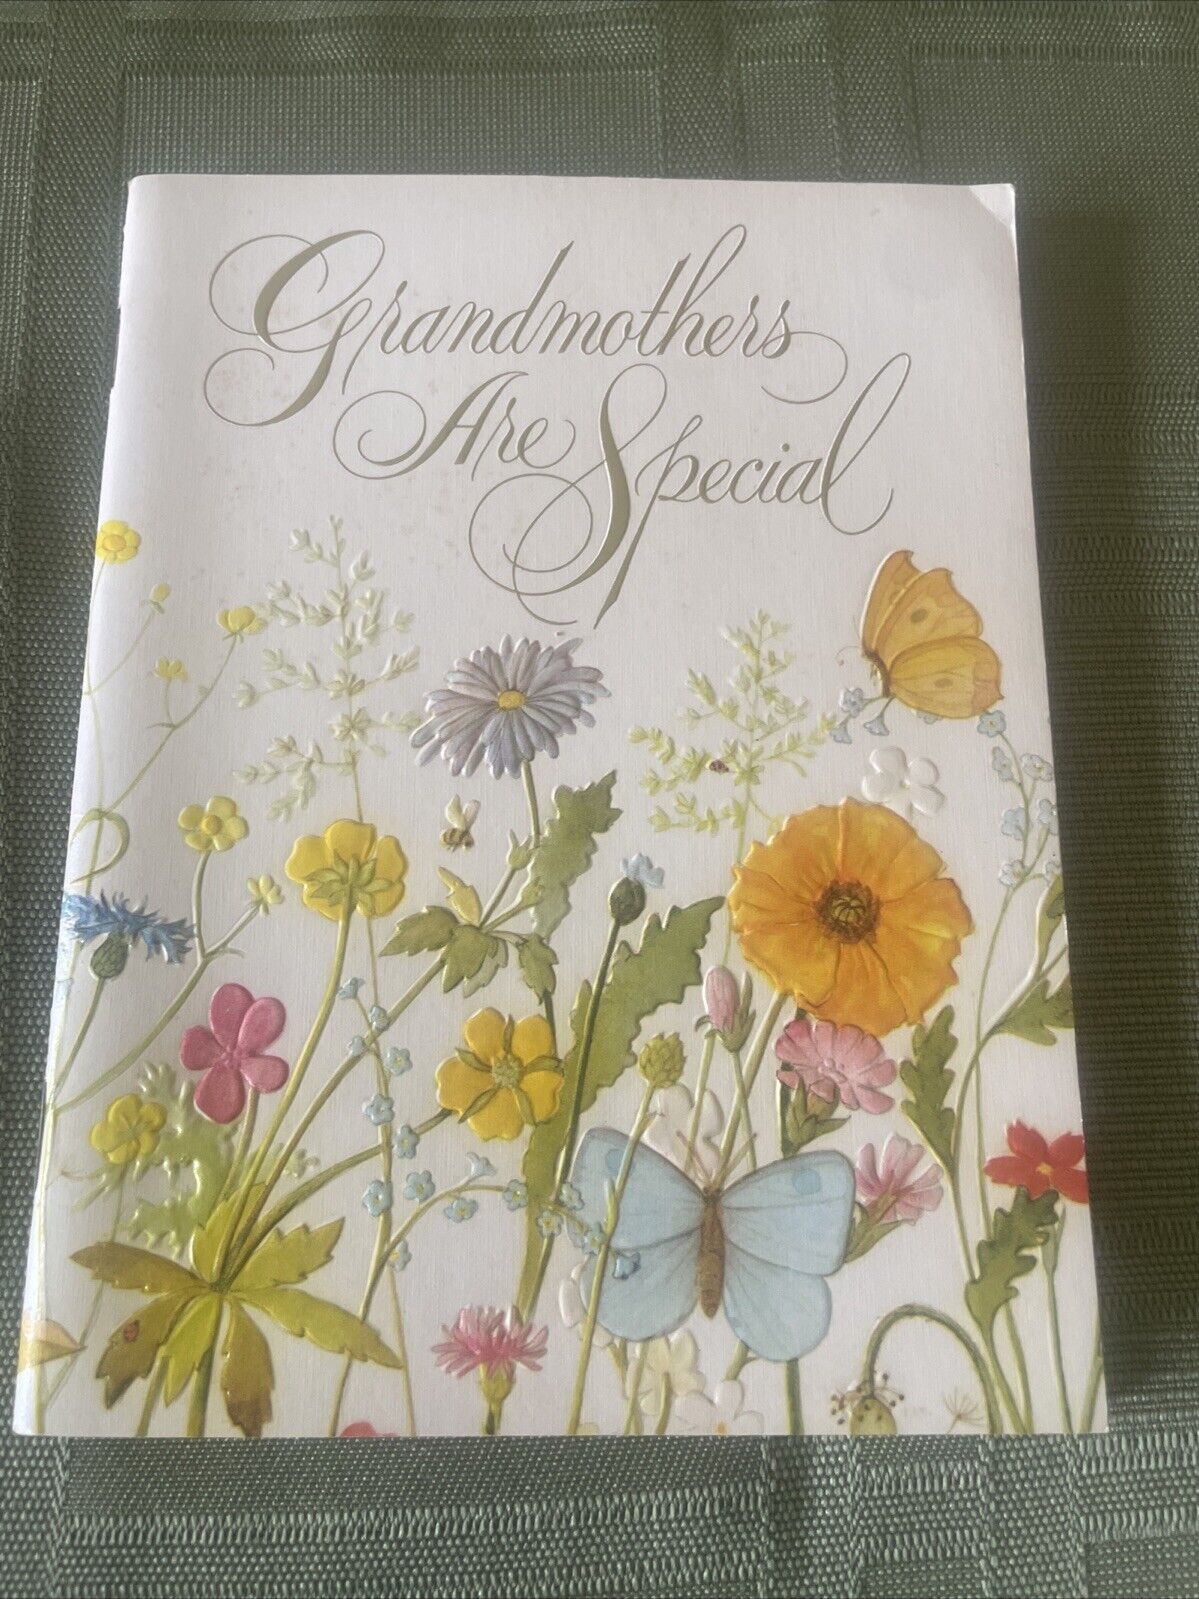 VERY VINTAGE Hallmark “Grandmothers Are Special” Mother’s Day Book/Card